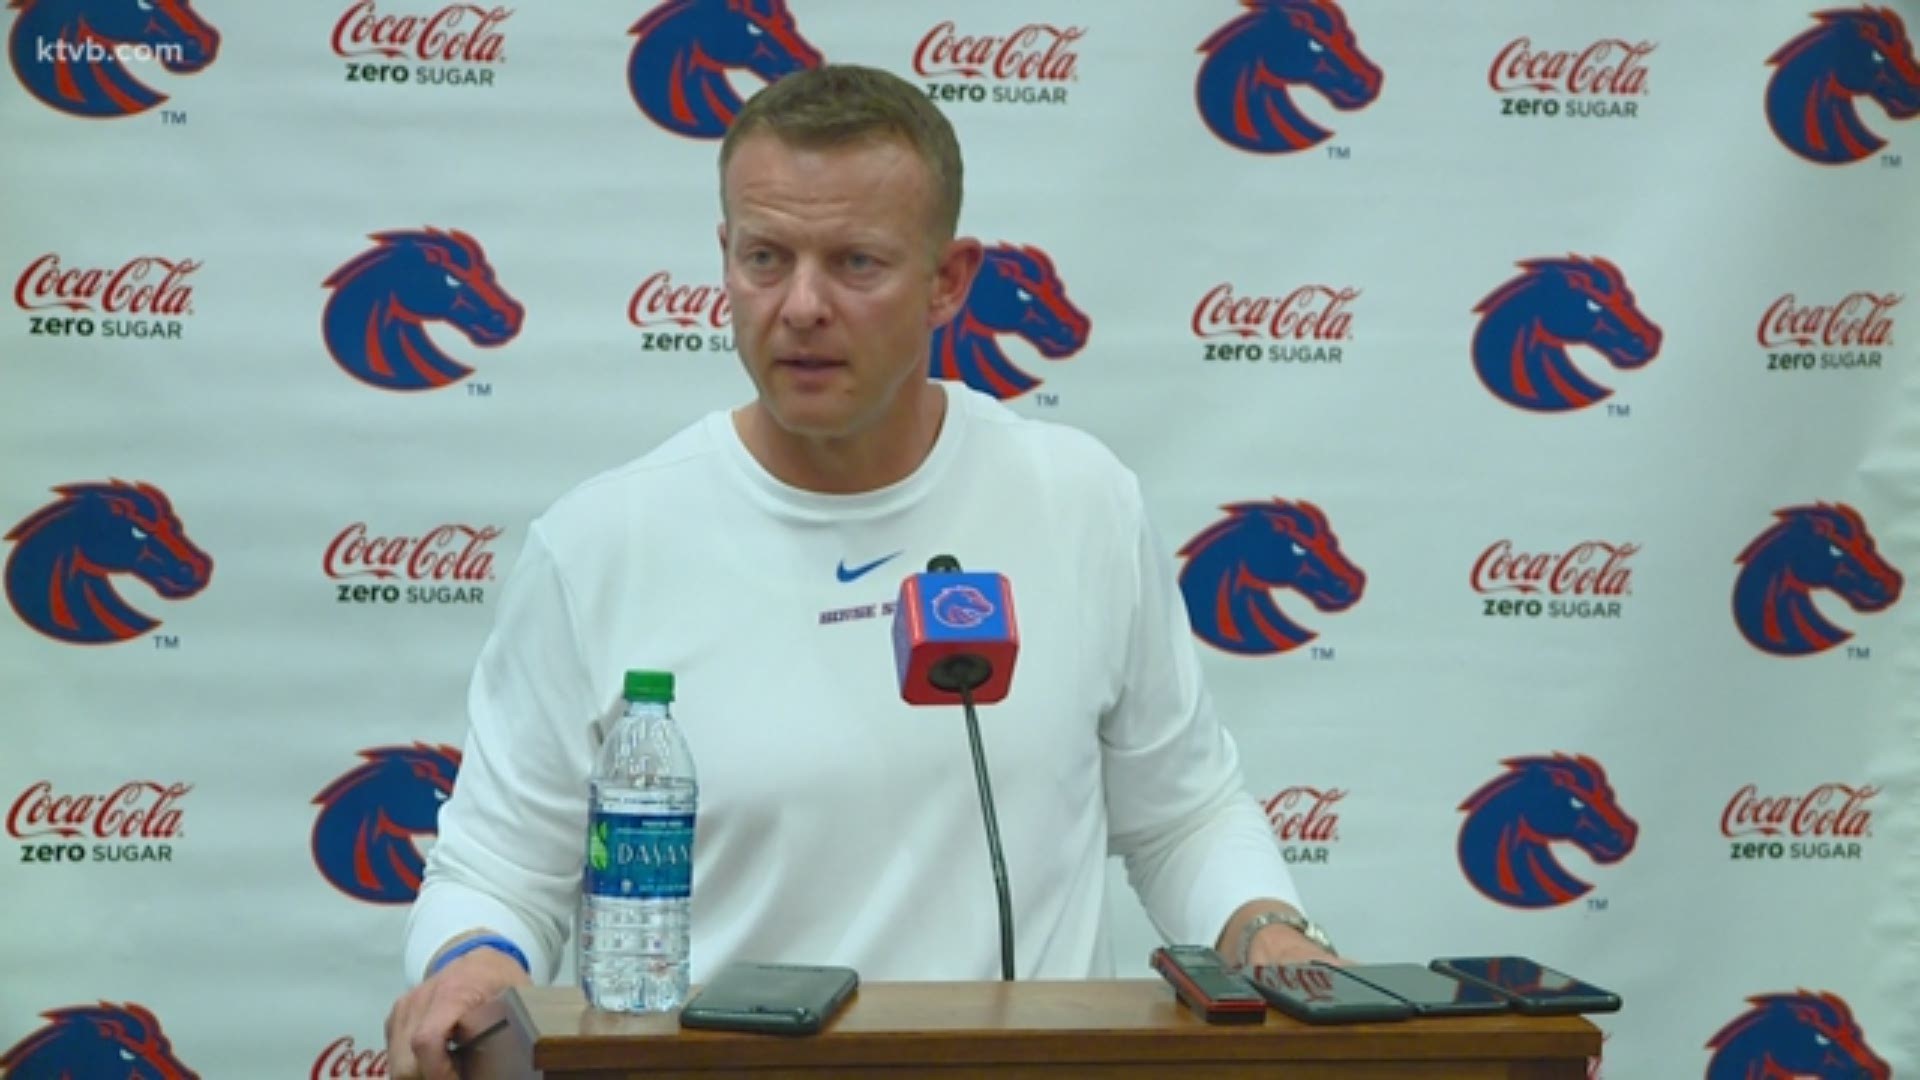 Bryan Harsin looks back at the close and memorable games against the BYU Cougars and how this year's team is preparing to play in Provo this week.